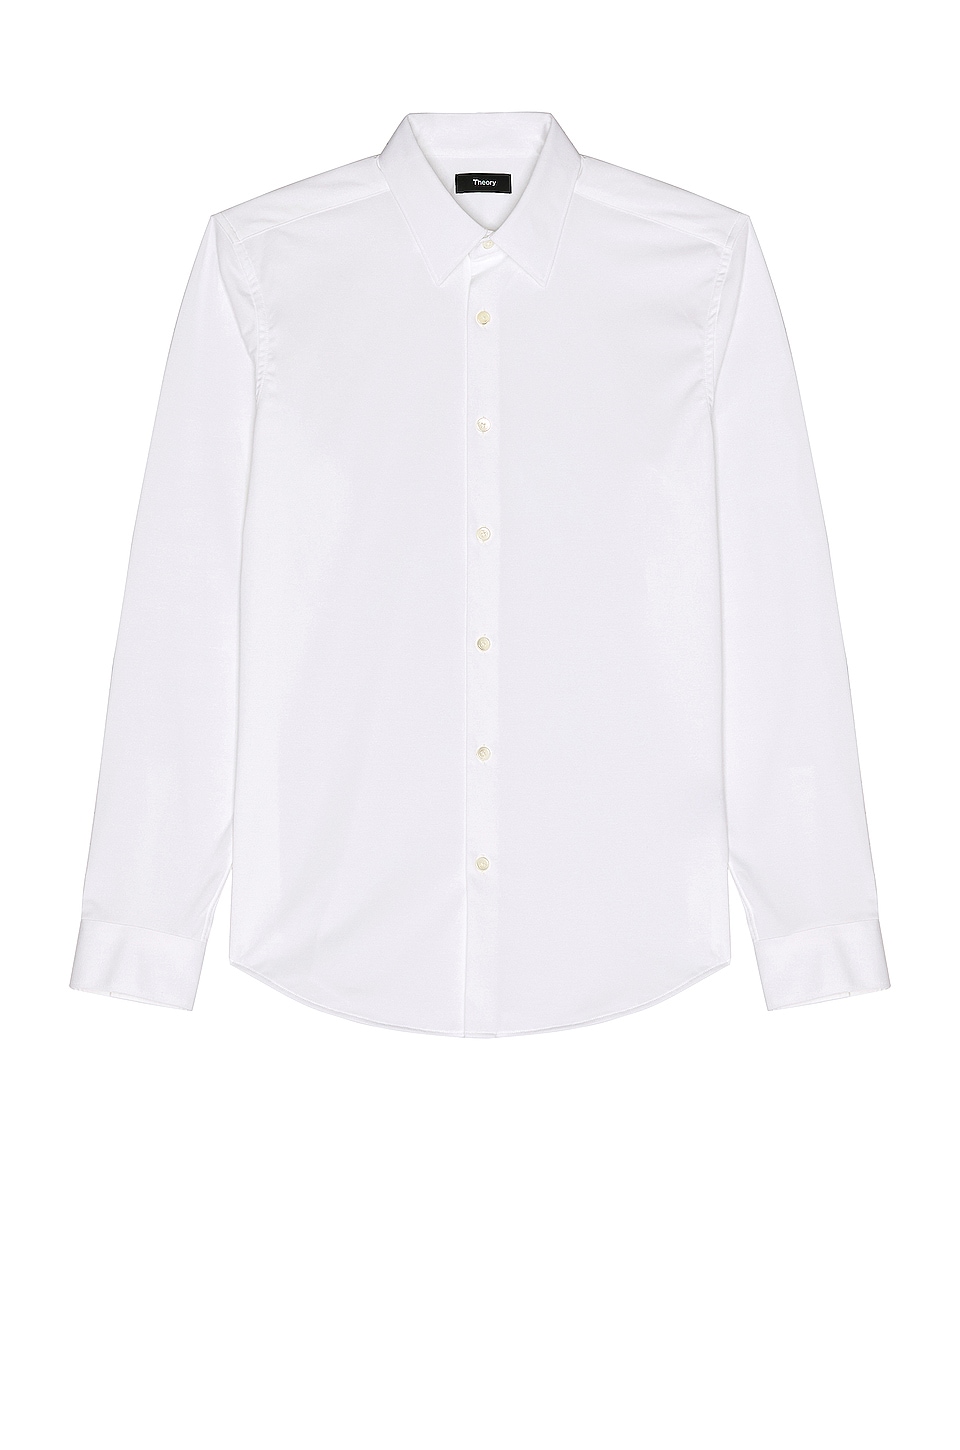 Theory Sylvain Shirt in White | REVOLVE